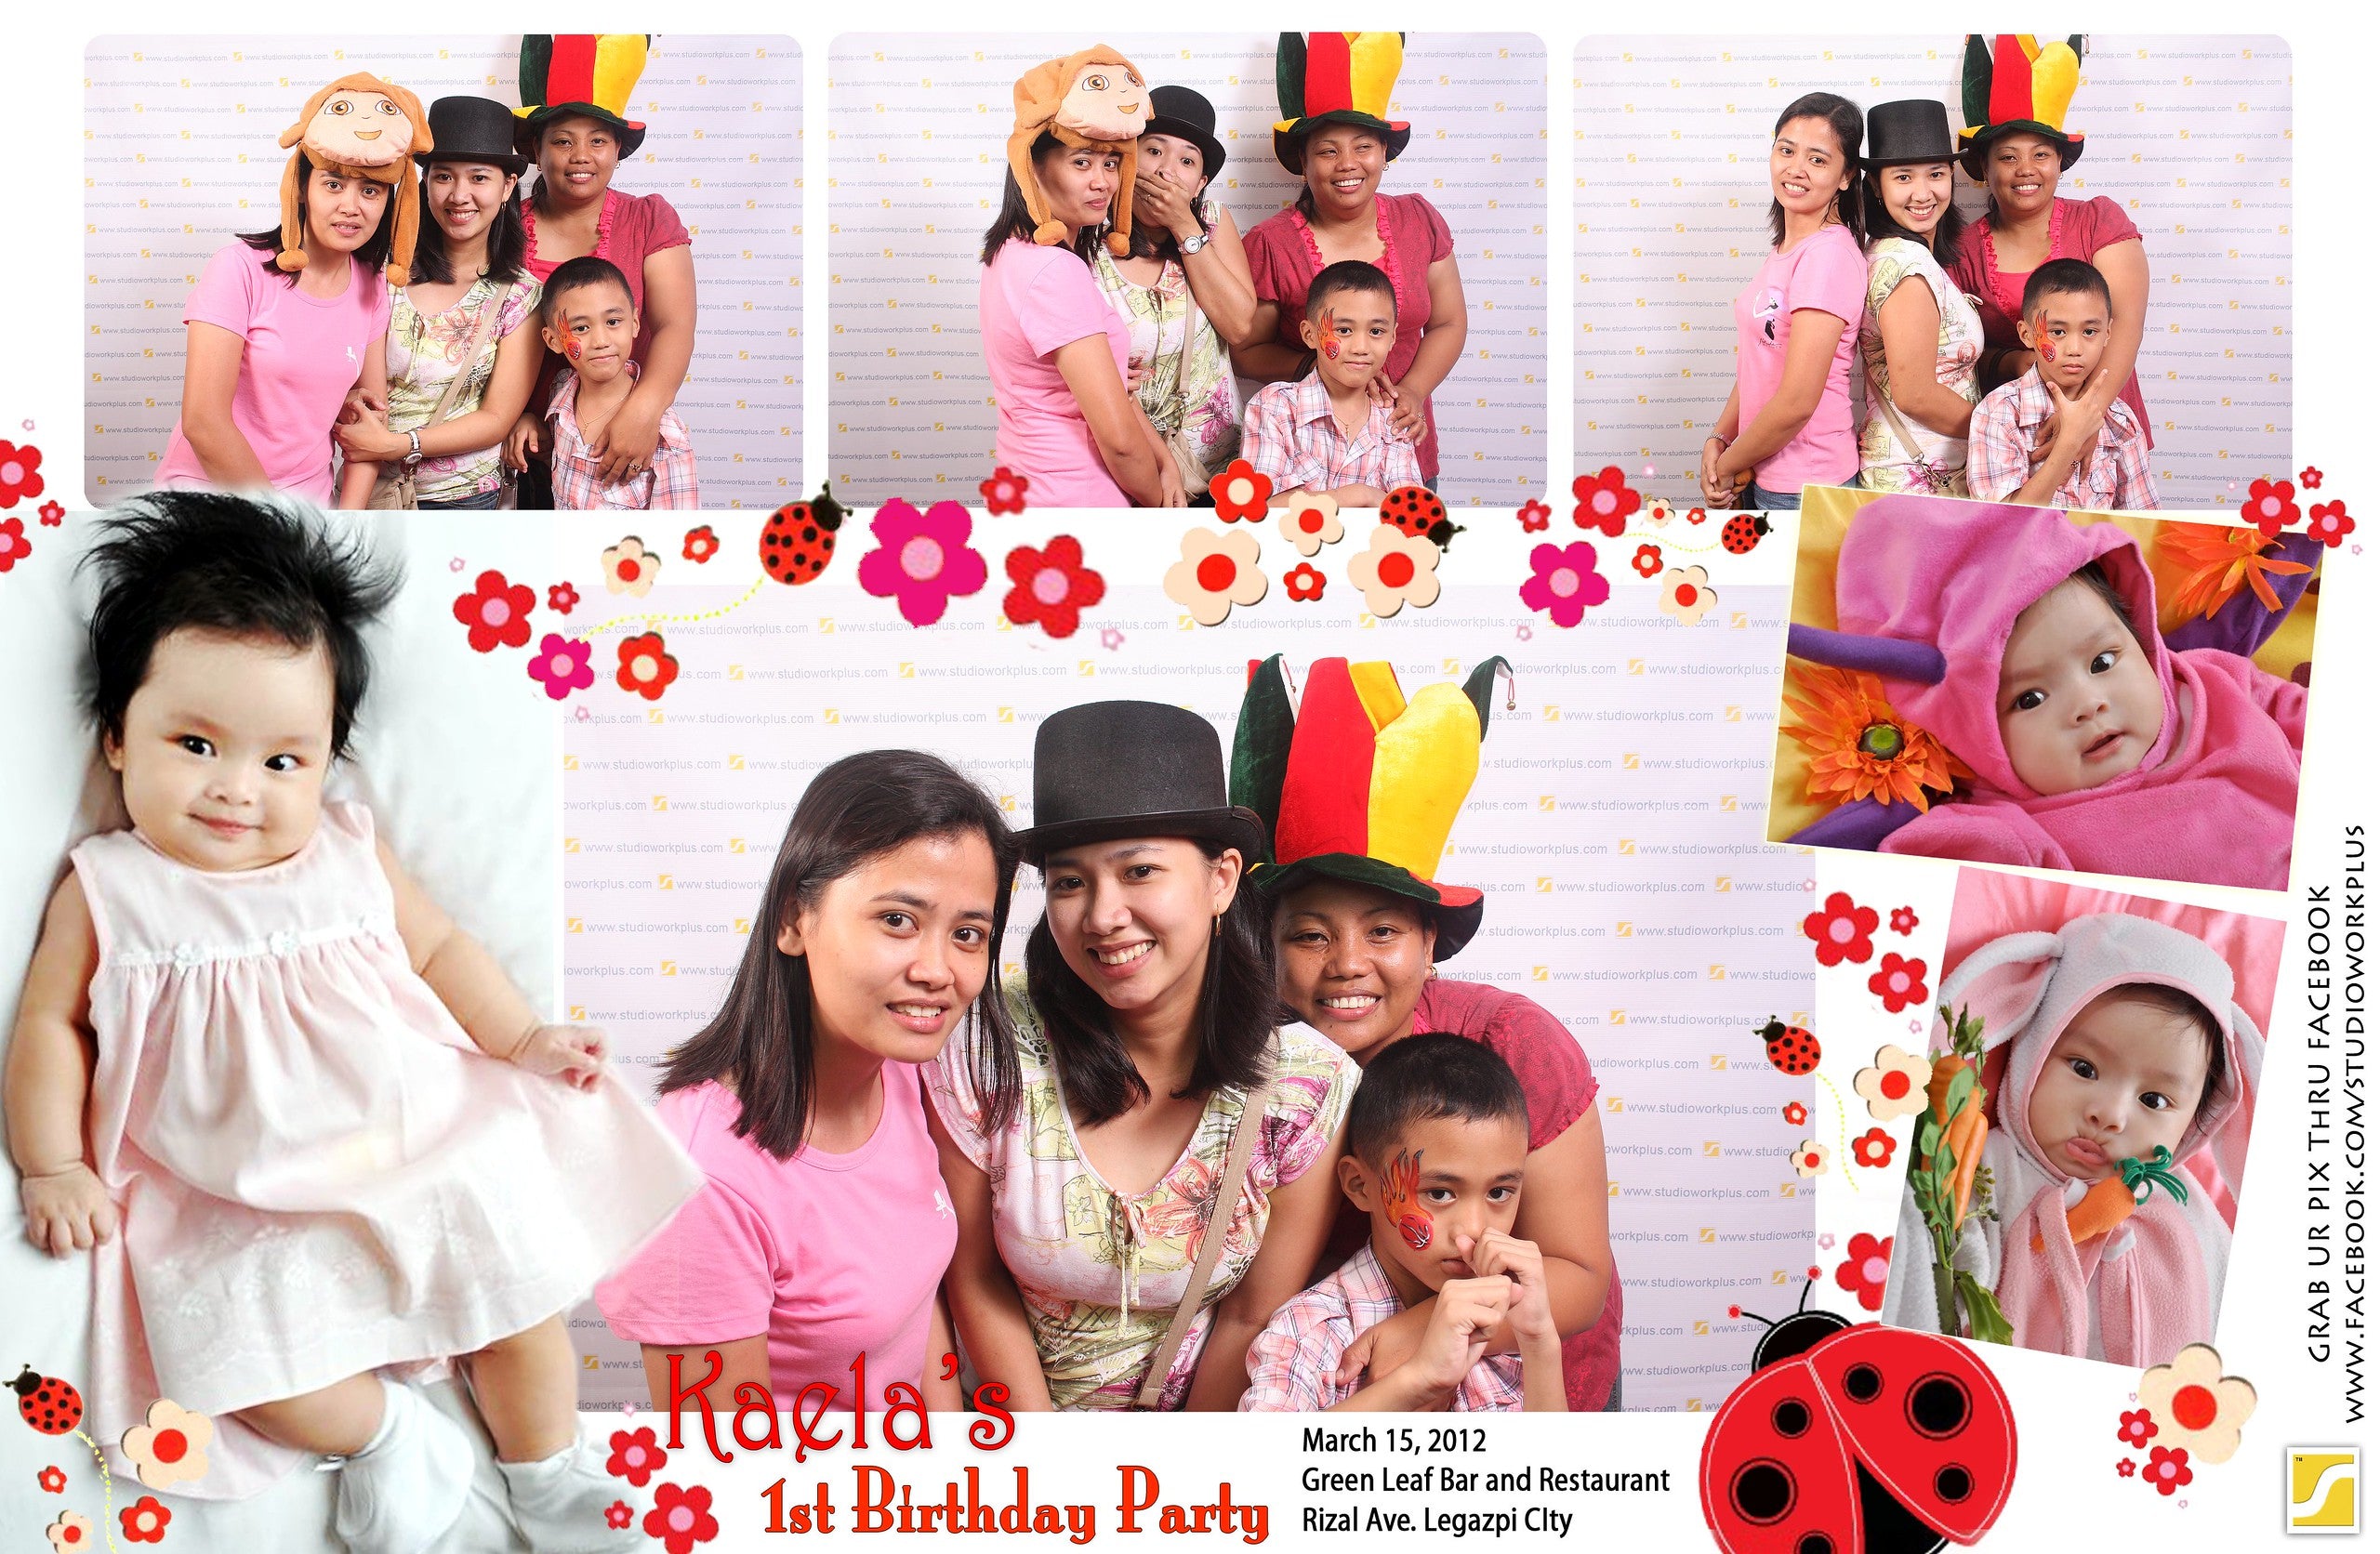 Photobooth Rental with Props and Backdrop & Unlimited Prints